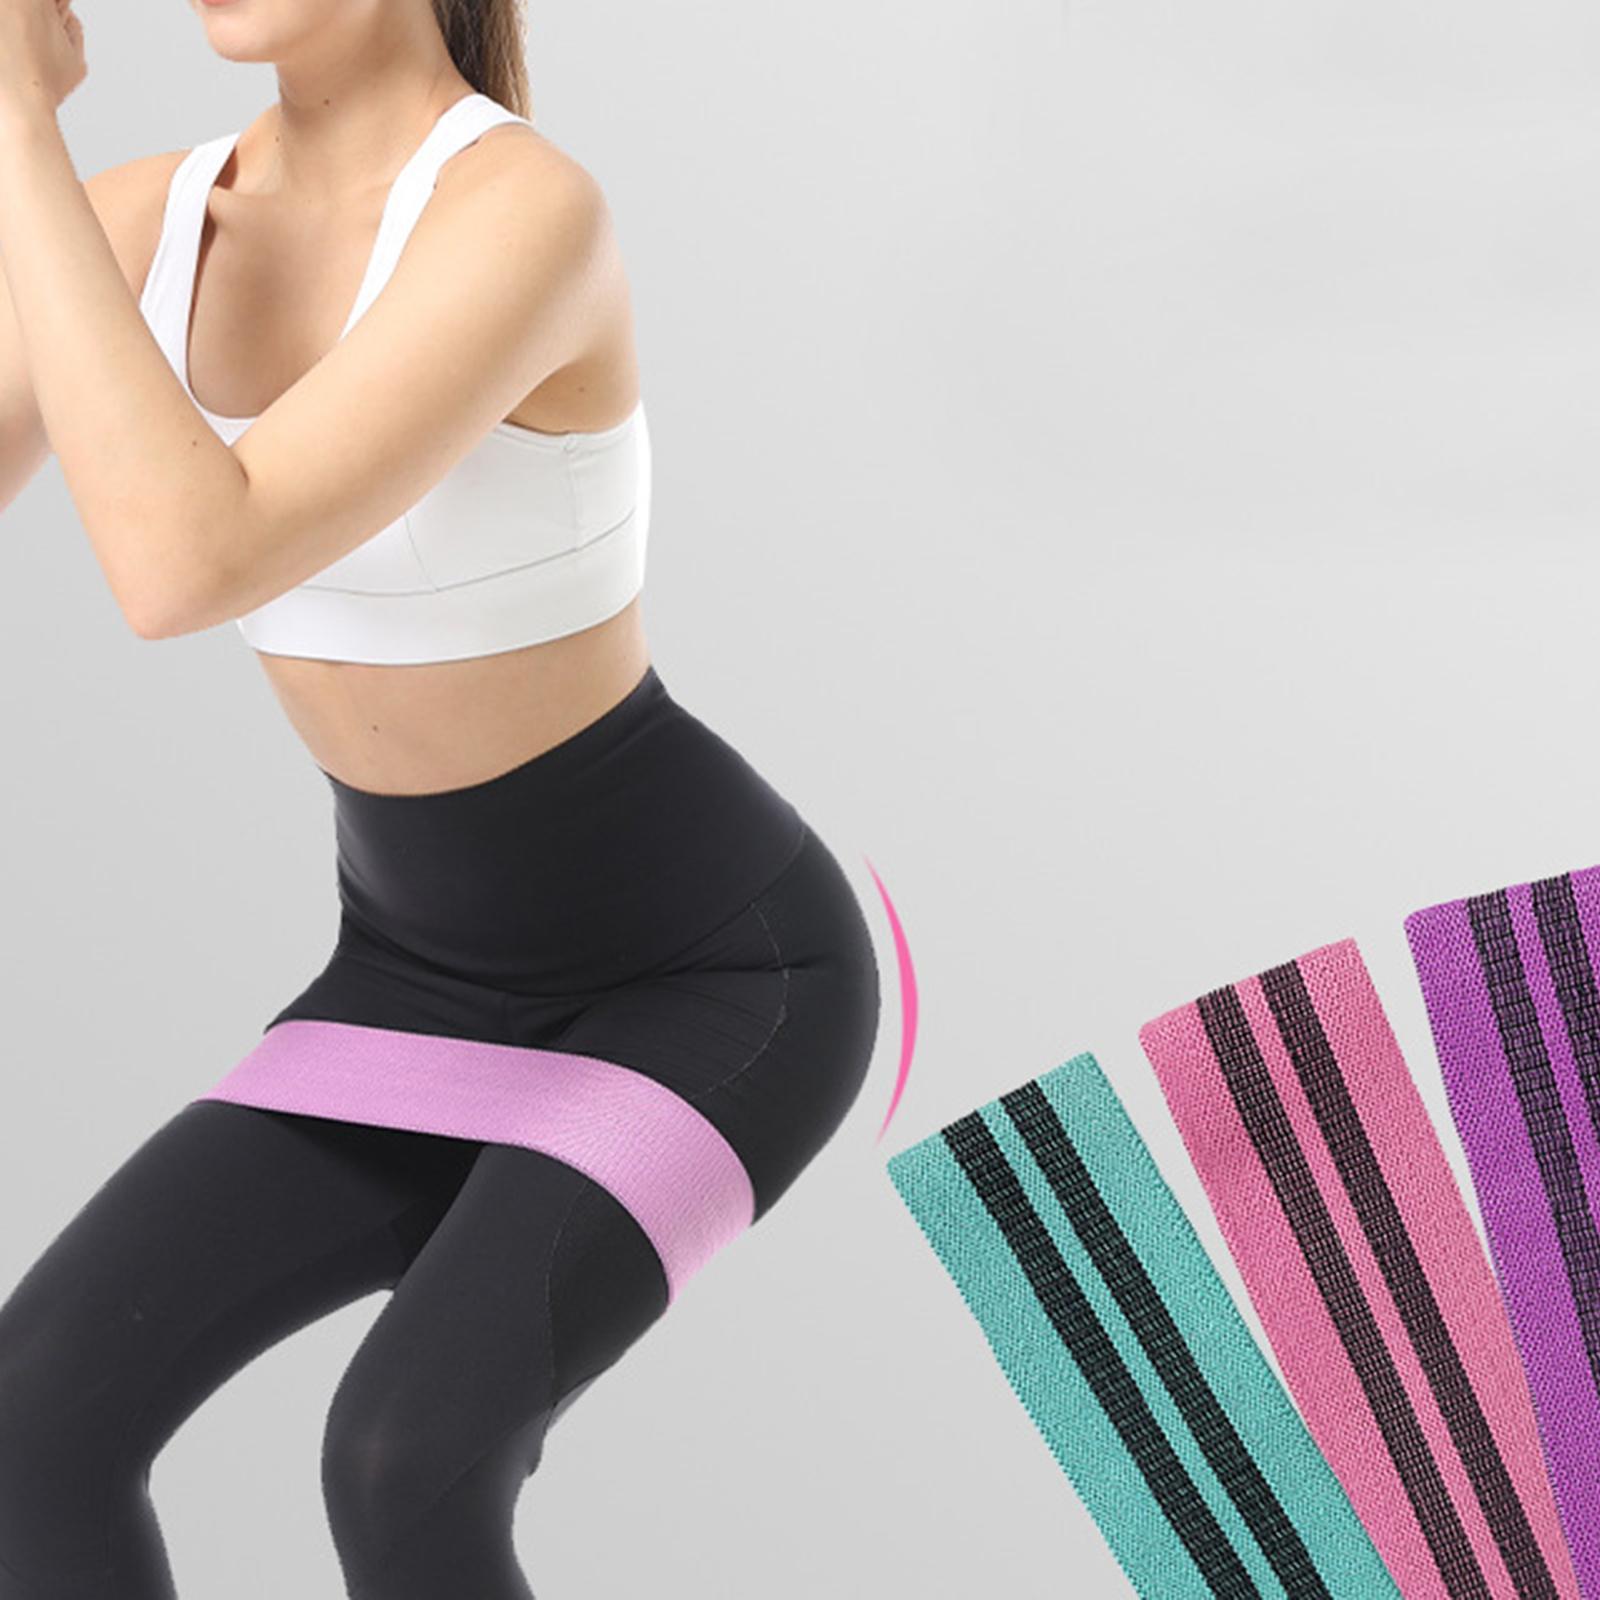 Portable Elastic Resistance Band Workout Non Slip for Booty Glutes